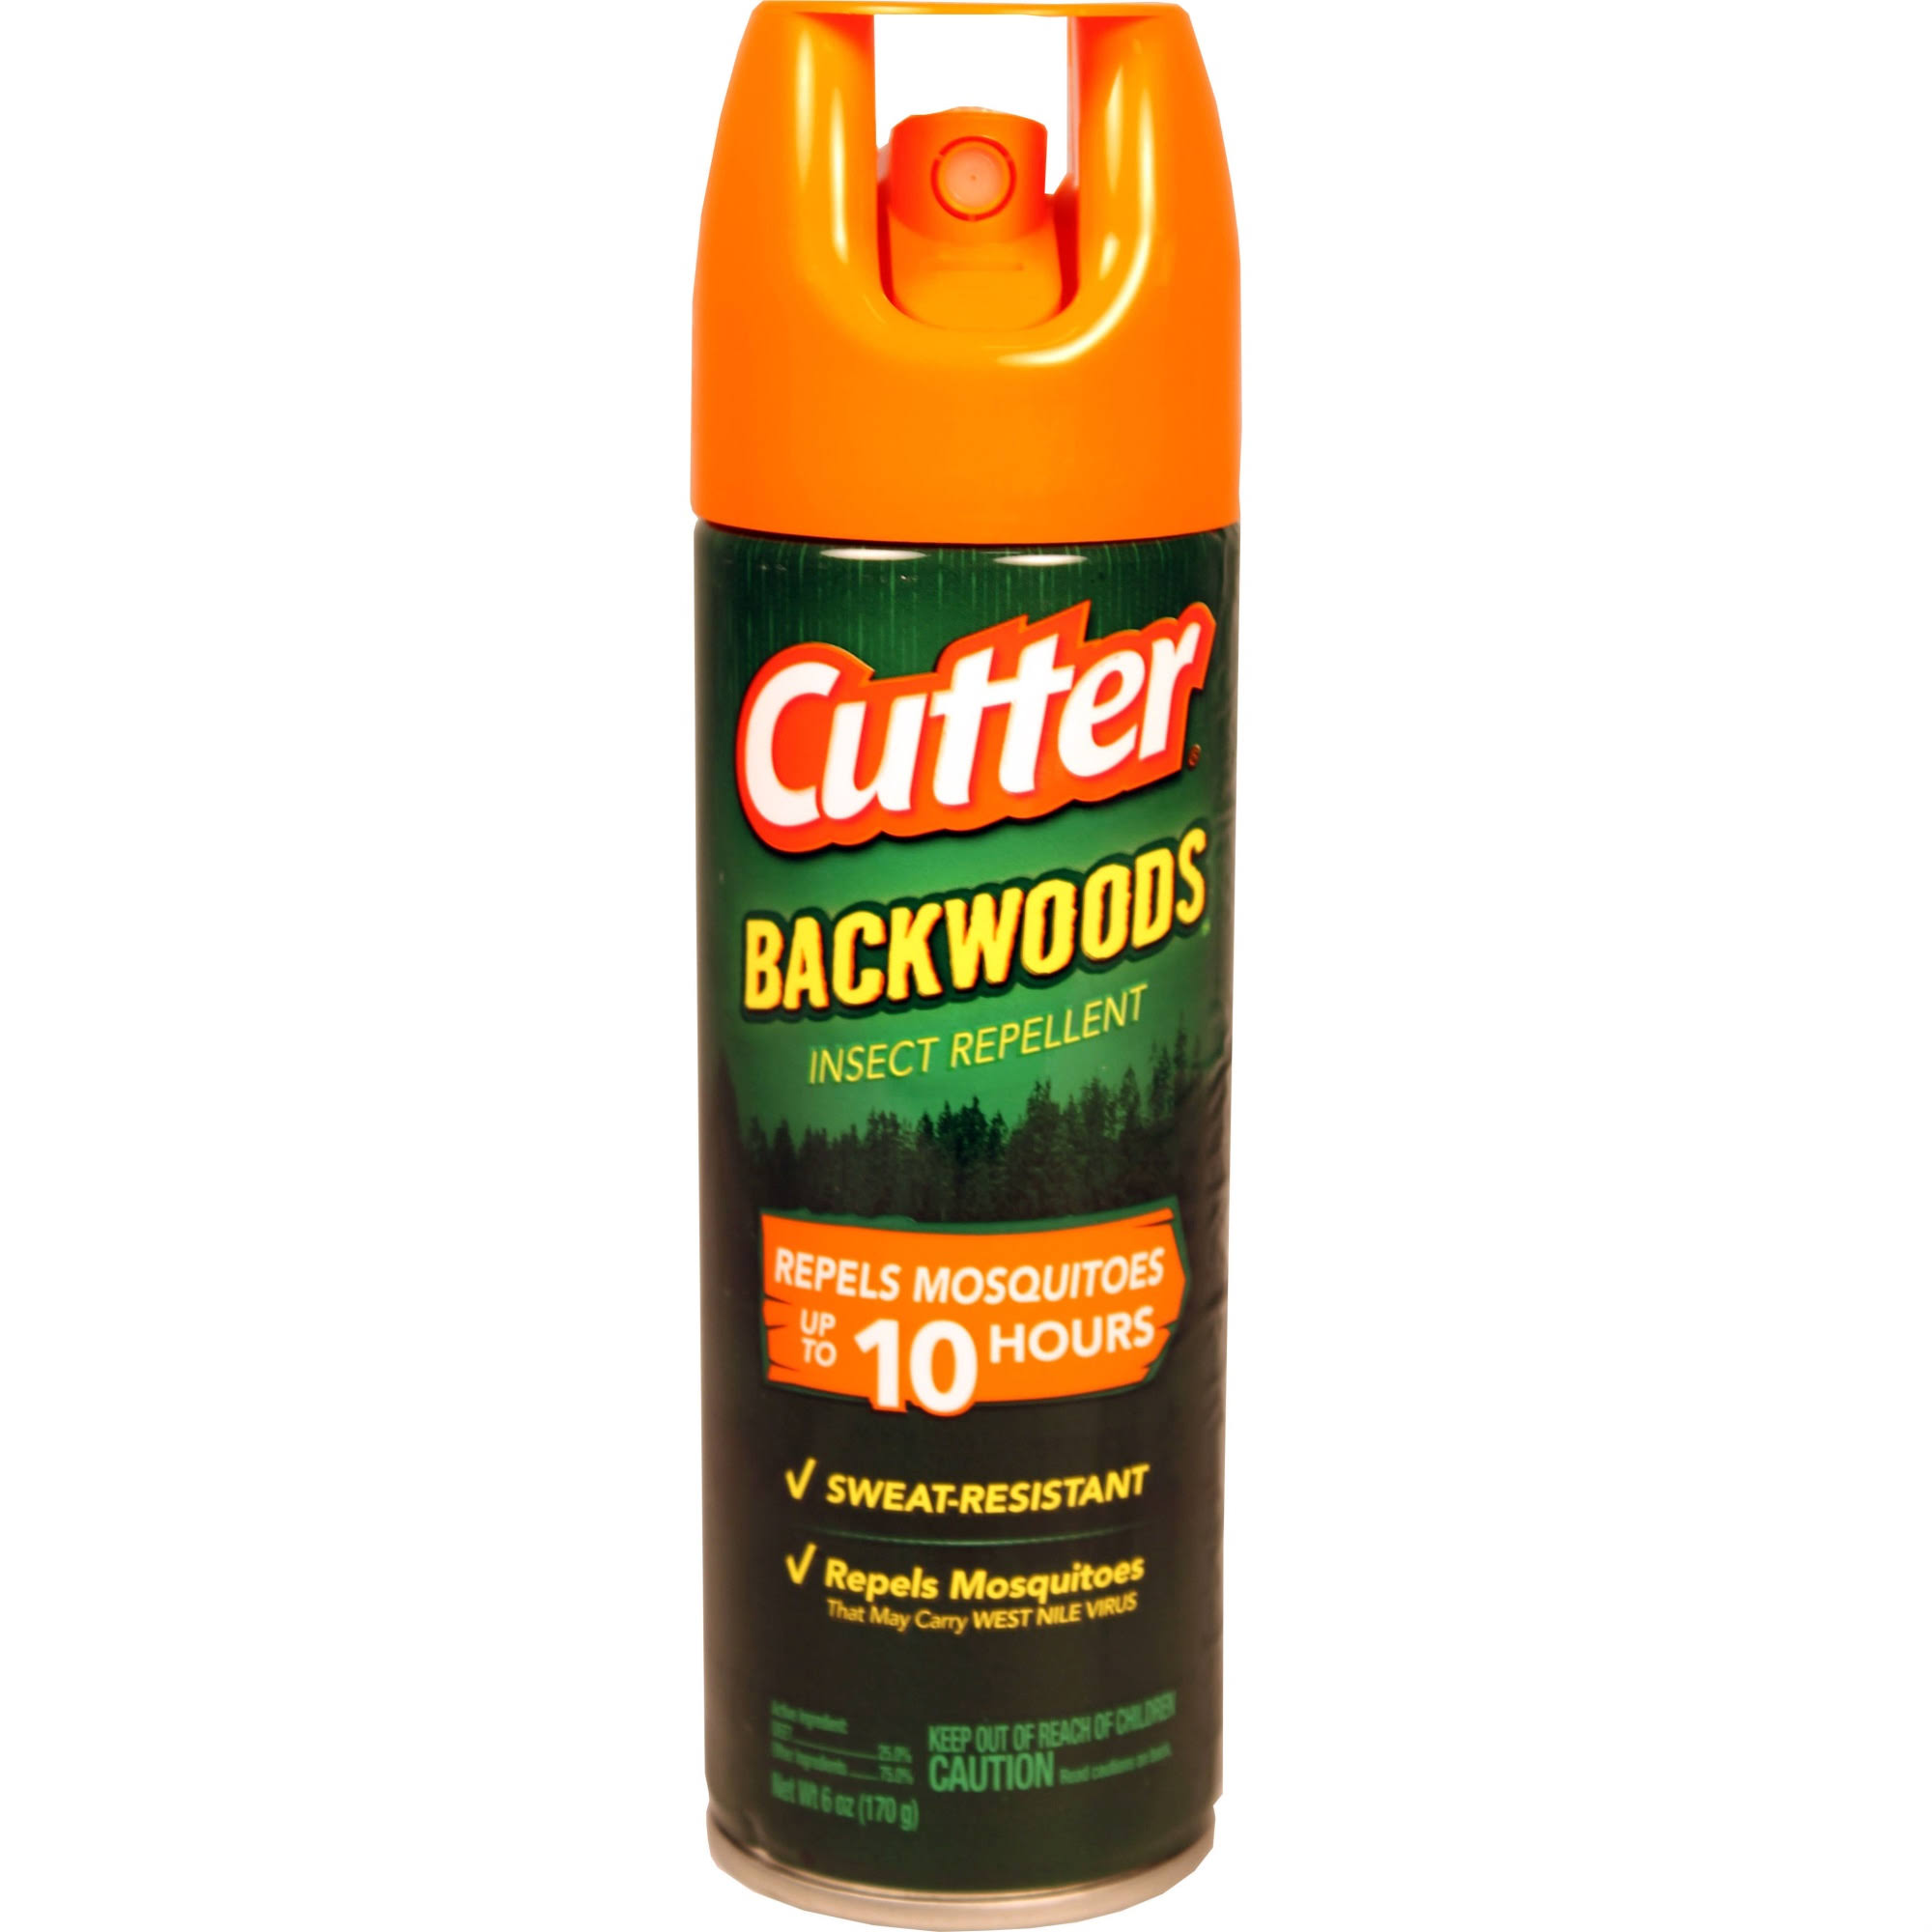 Cutter Backwoods Insect Repellent - 6oz